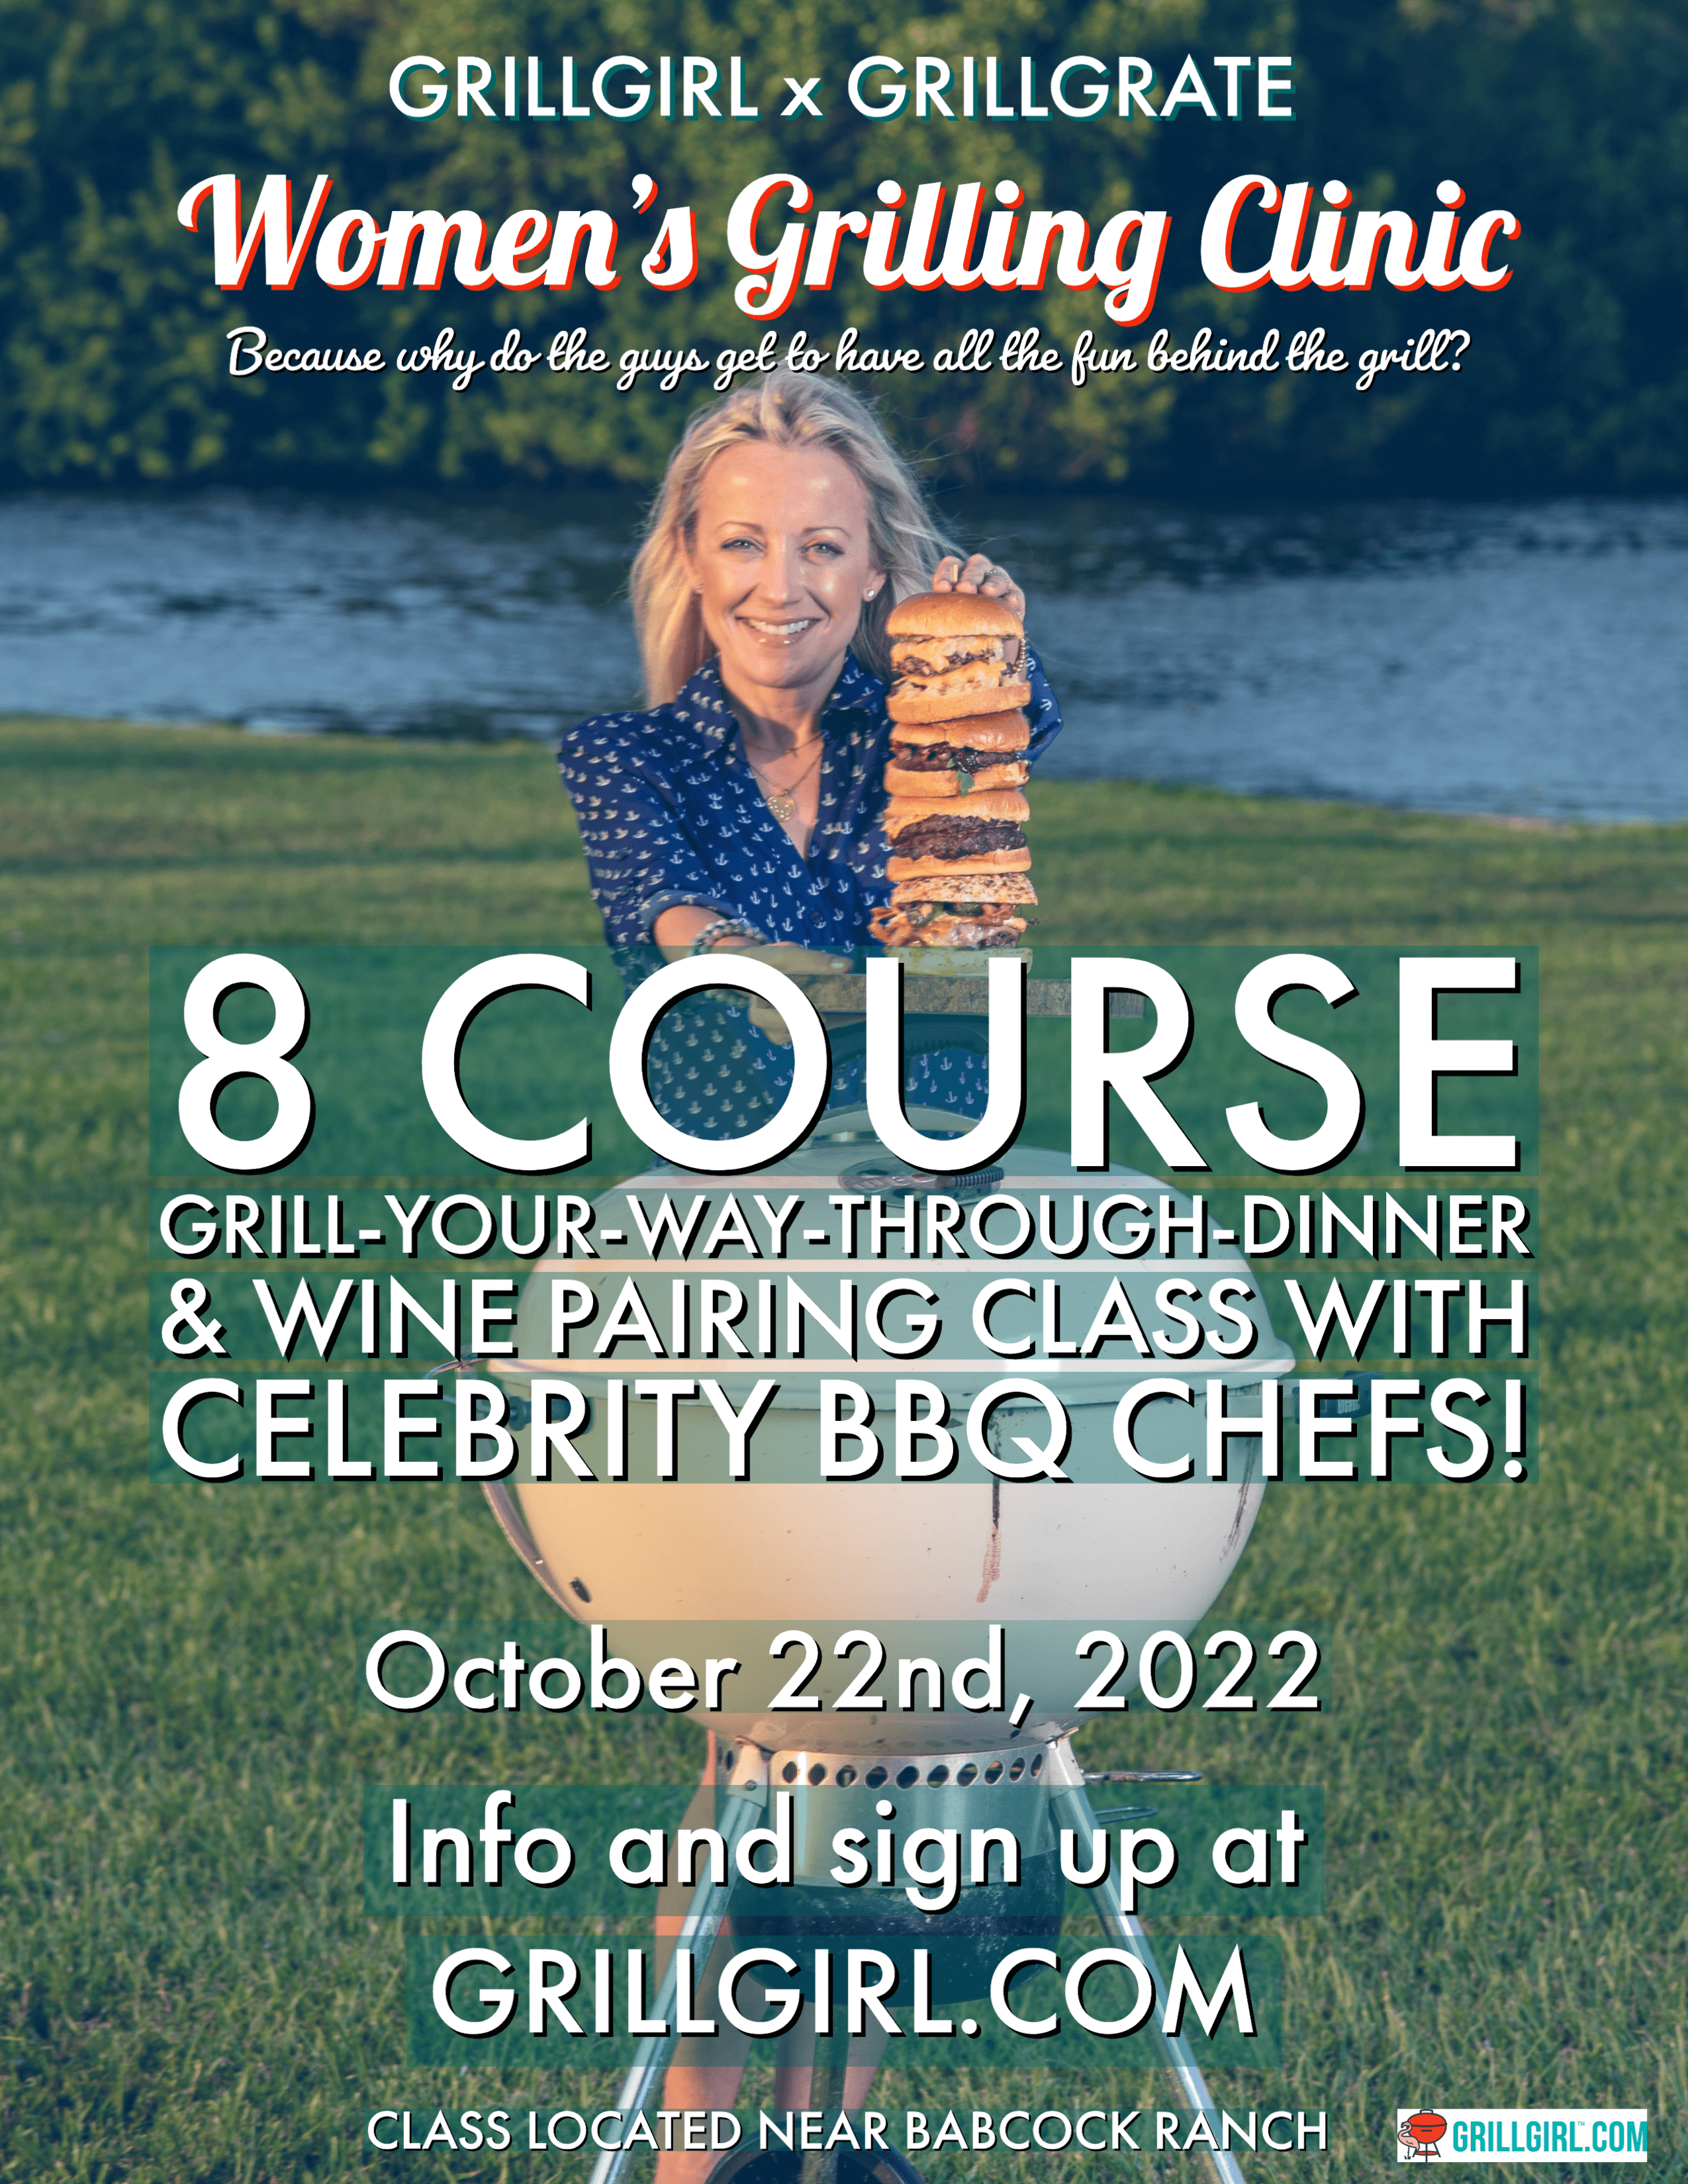 "GrillGirl" Robyn Lindar's Women's Grilling Clinic is a grilling and wine pairing dinner that gives women the opportunity to learn to try out different grills while learning from celebrity BBQ Chefs.